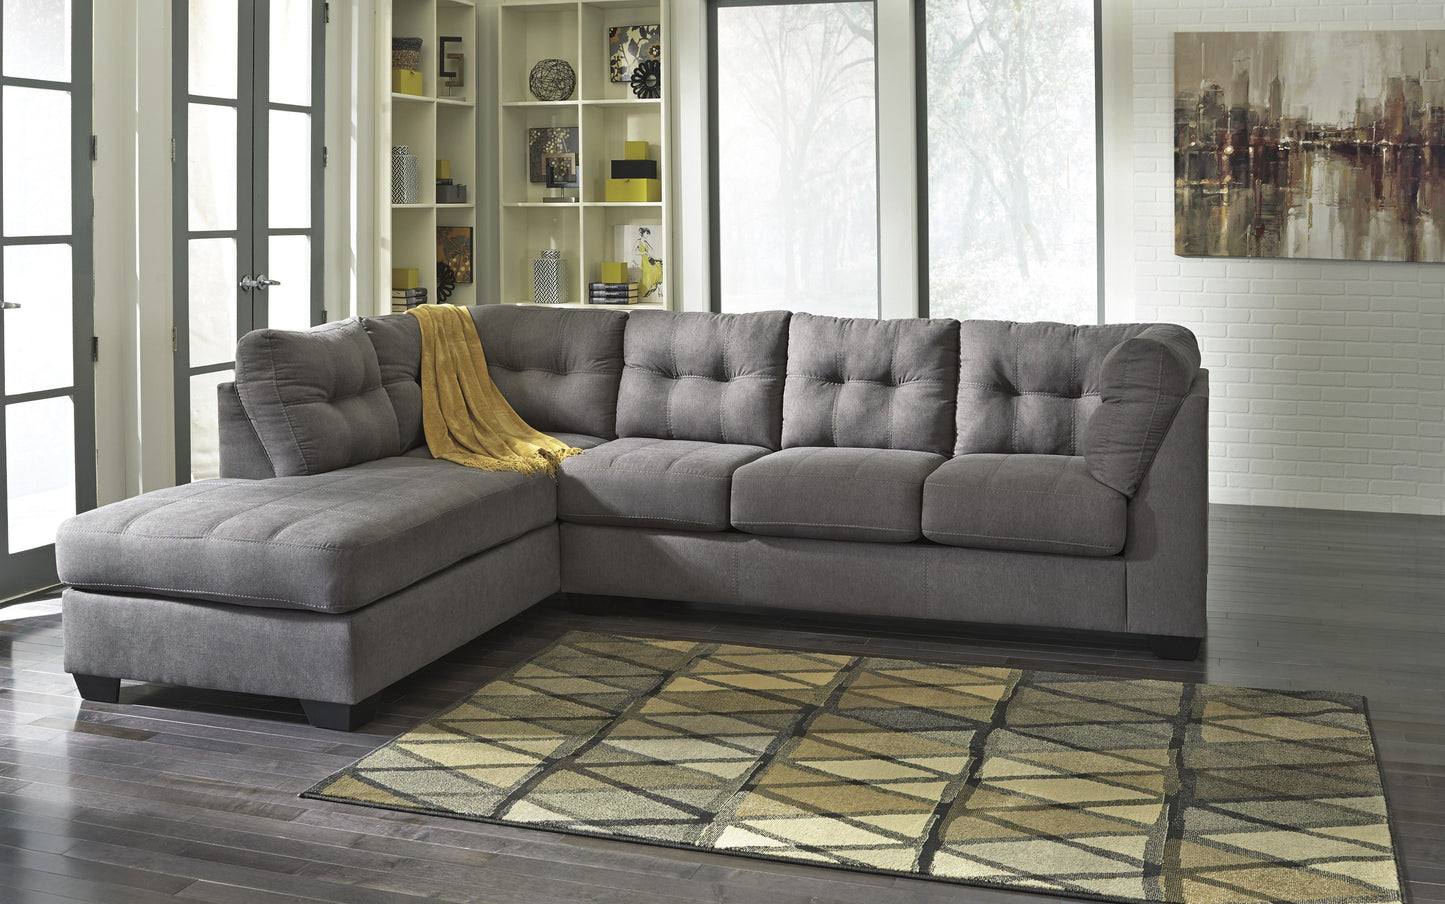 WEEKLY or MONTHLY. Mayor of Whoville Gray Reversible Chaise Sectional